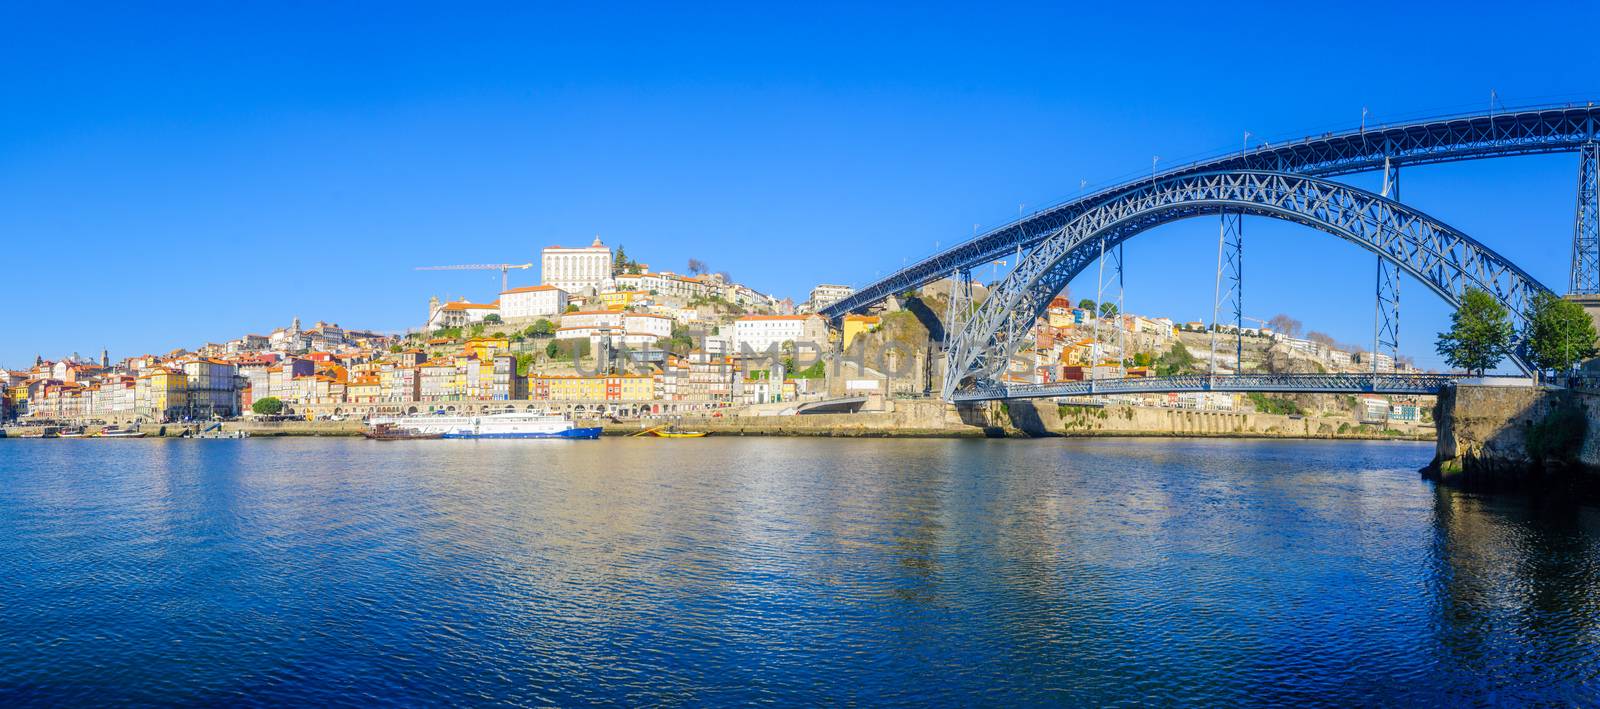 Panoramic view of the Dom Luis I Bridge, the Douro river and the Ribeira (riverside), with colorful buildings, in Porto, Portugal